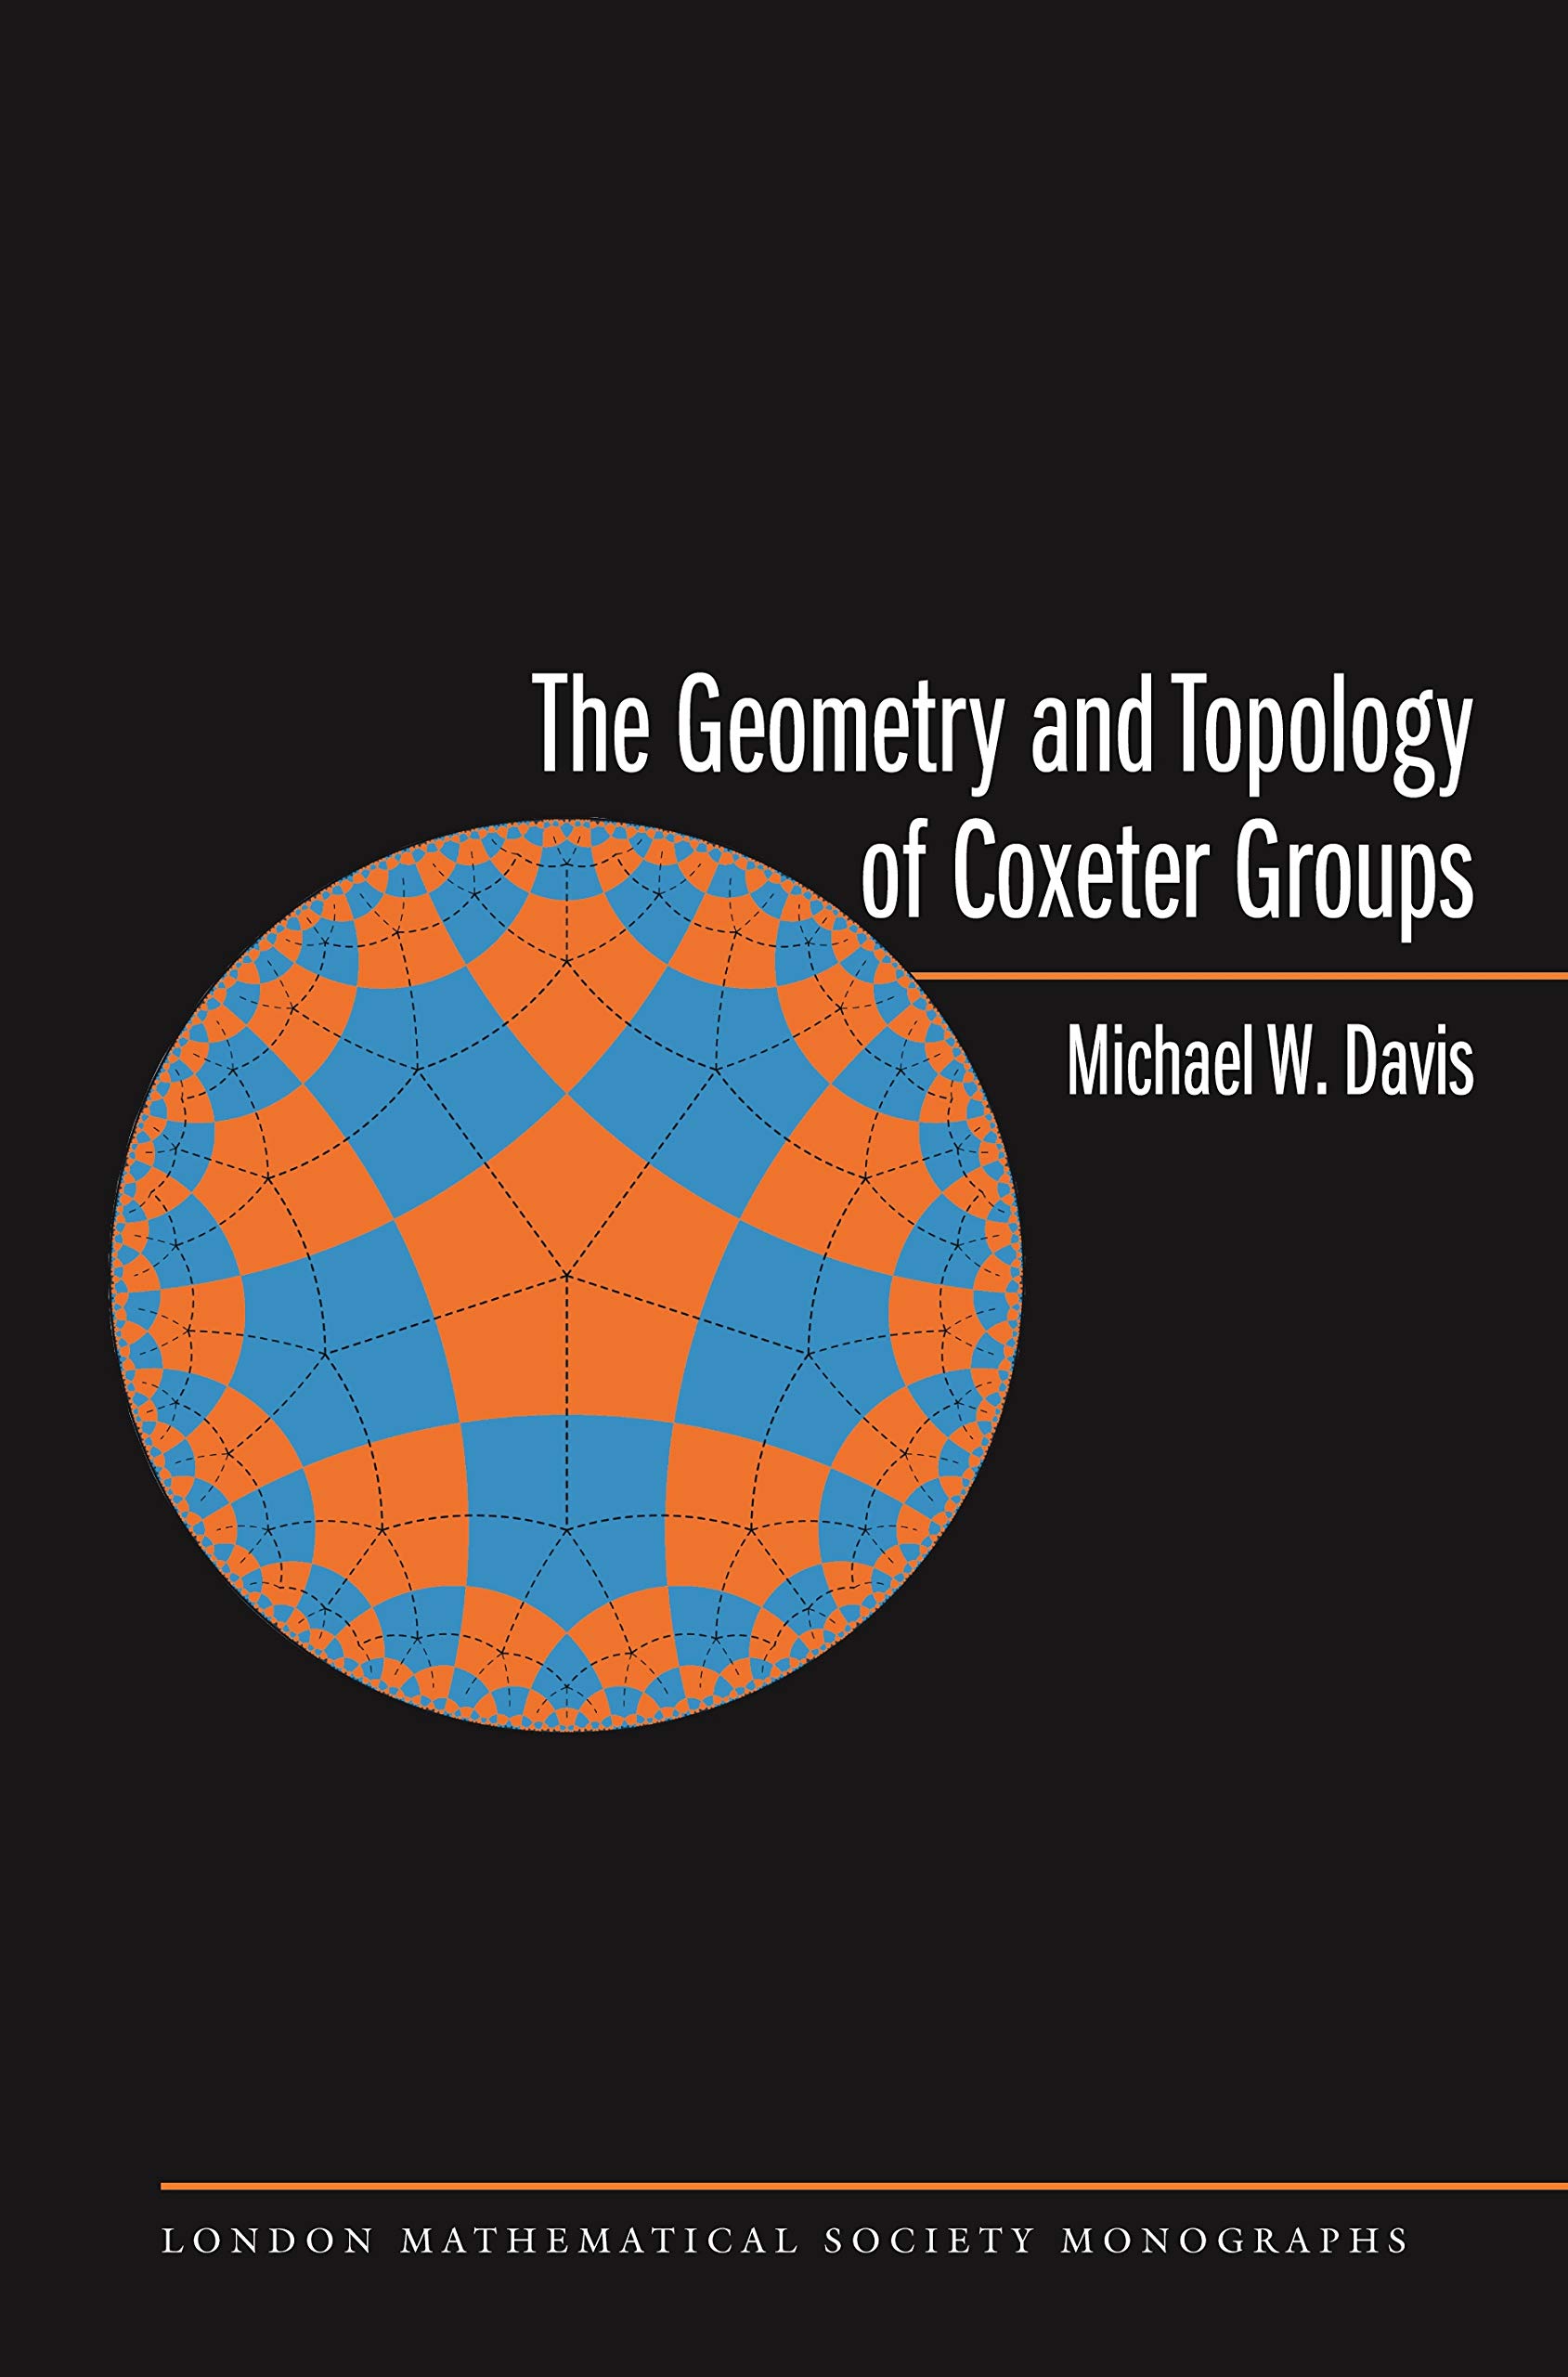 The Geometry and Topology of Coxeter Groups